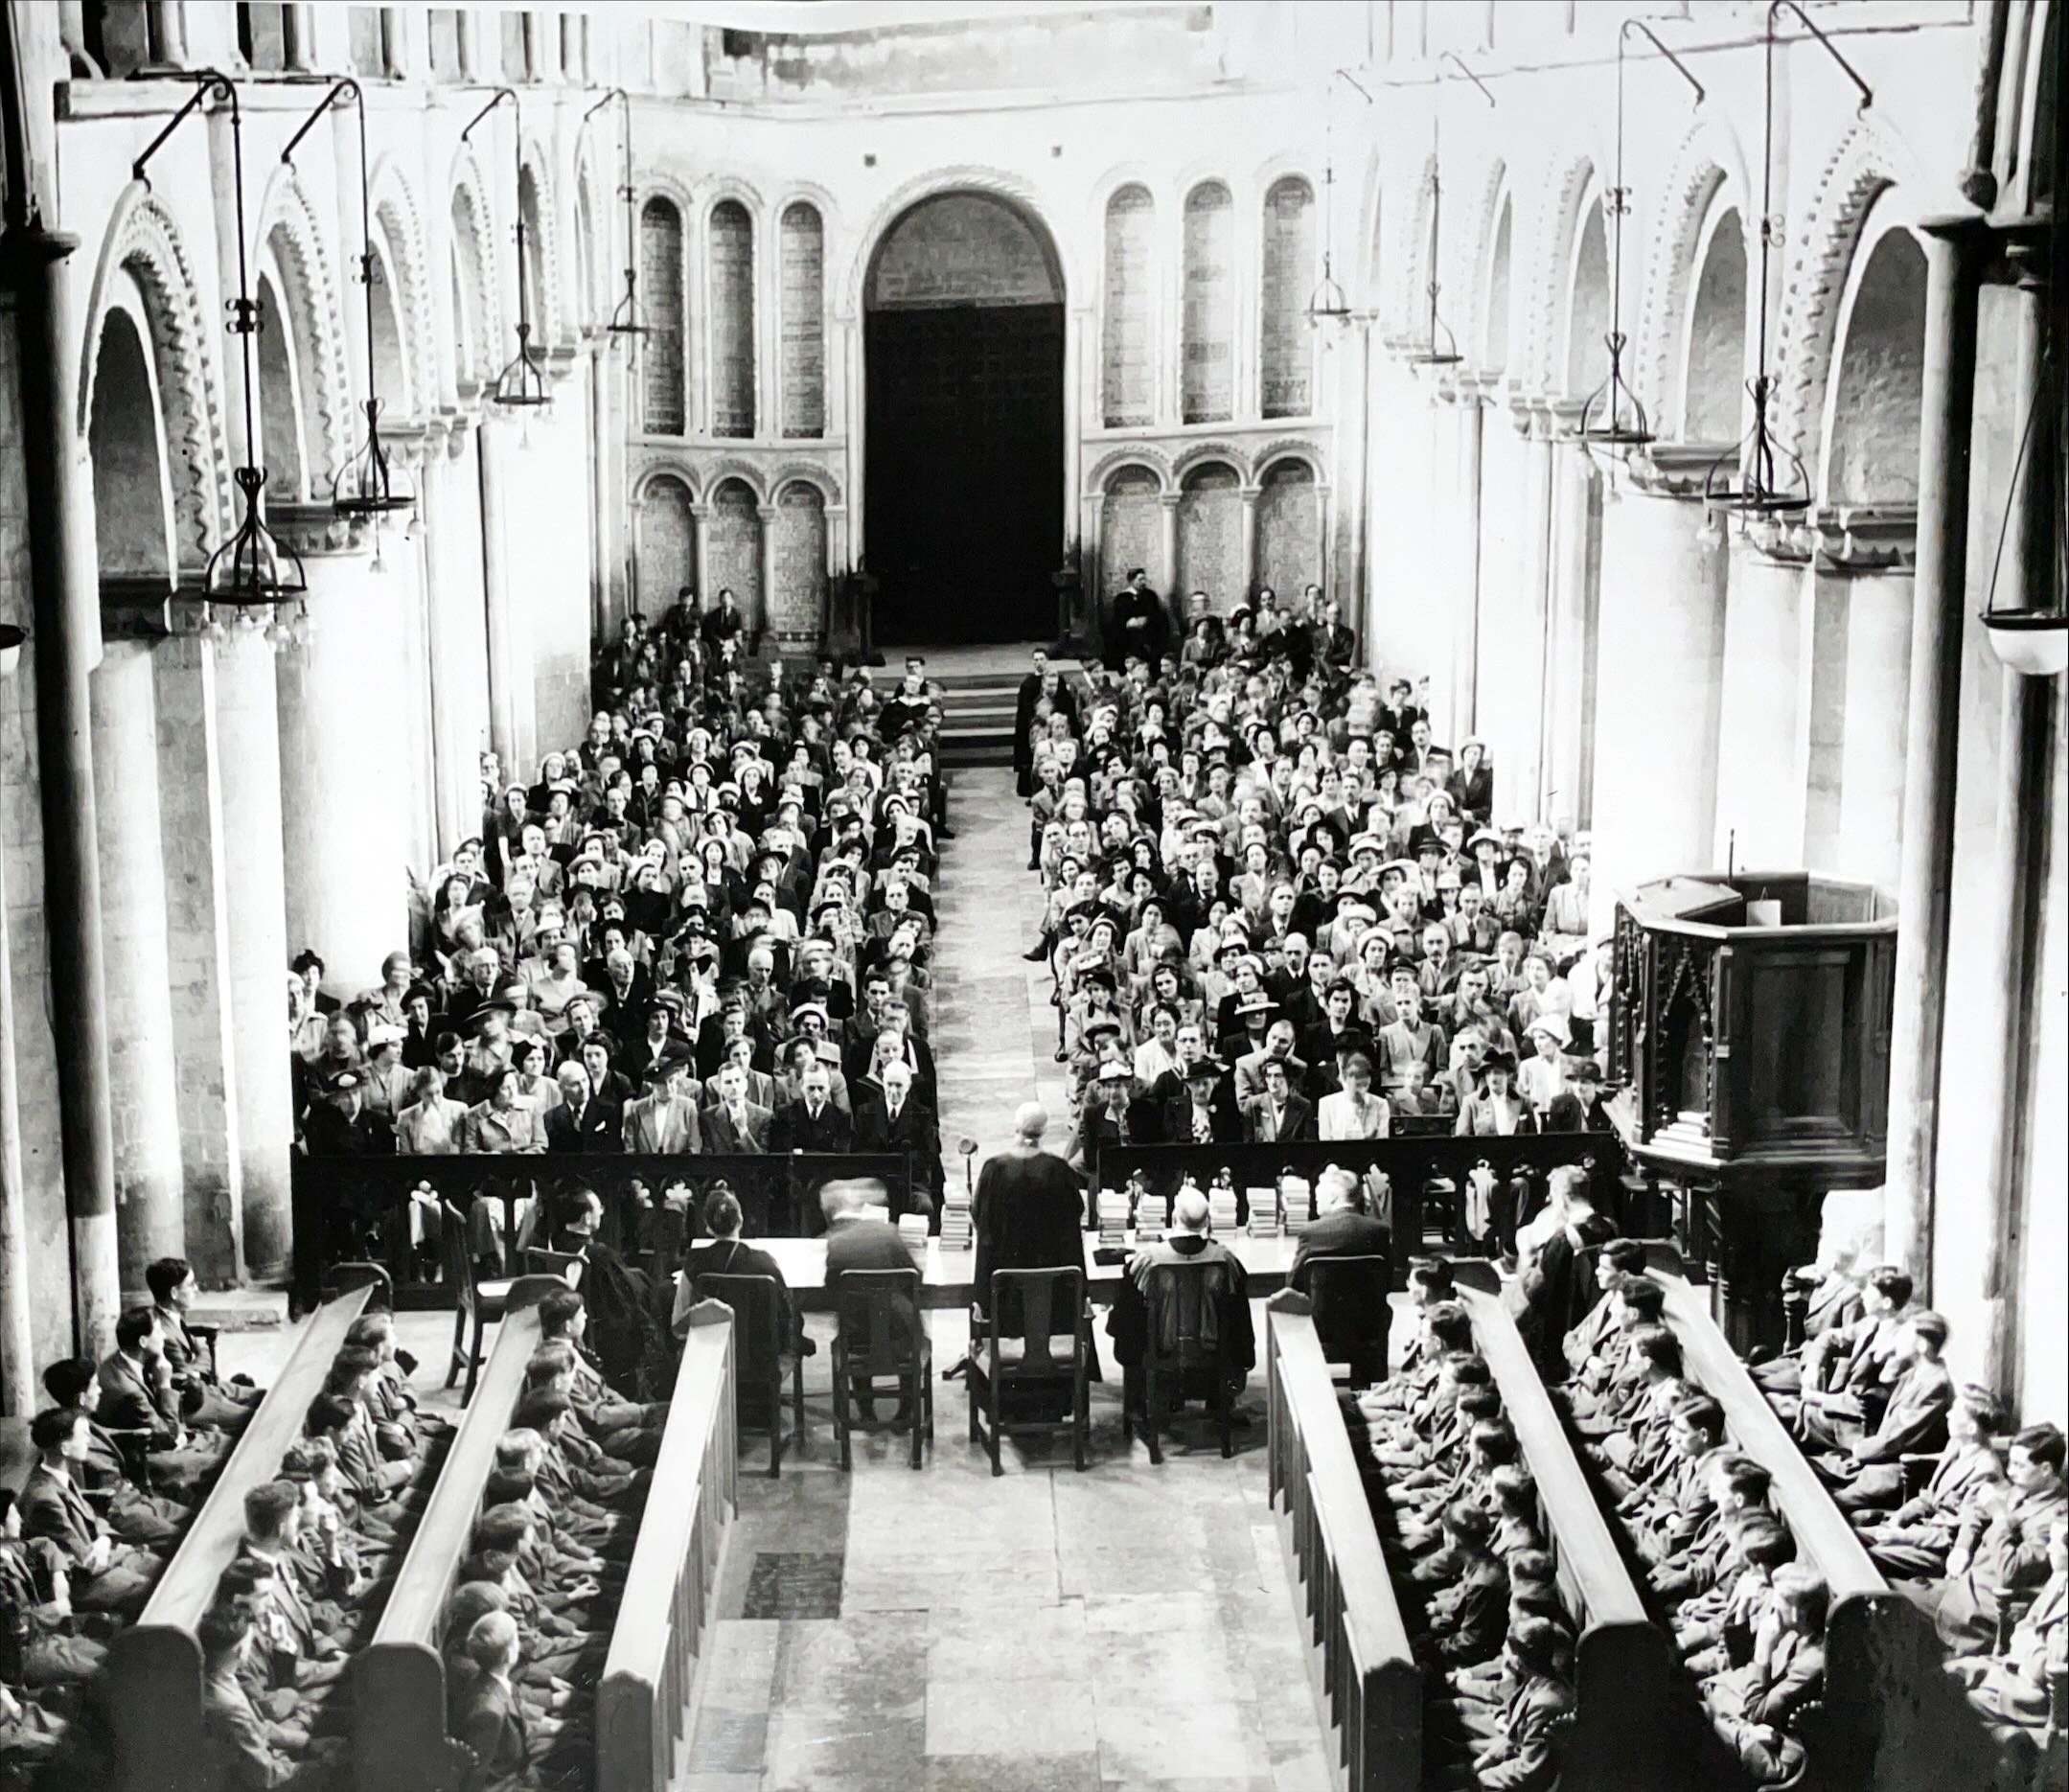 The Dean, Chairman of Govorners, speaking at King's School Speech Day, July 1952